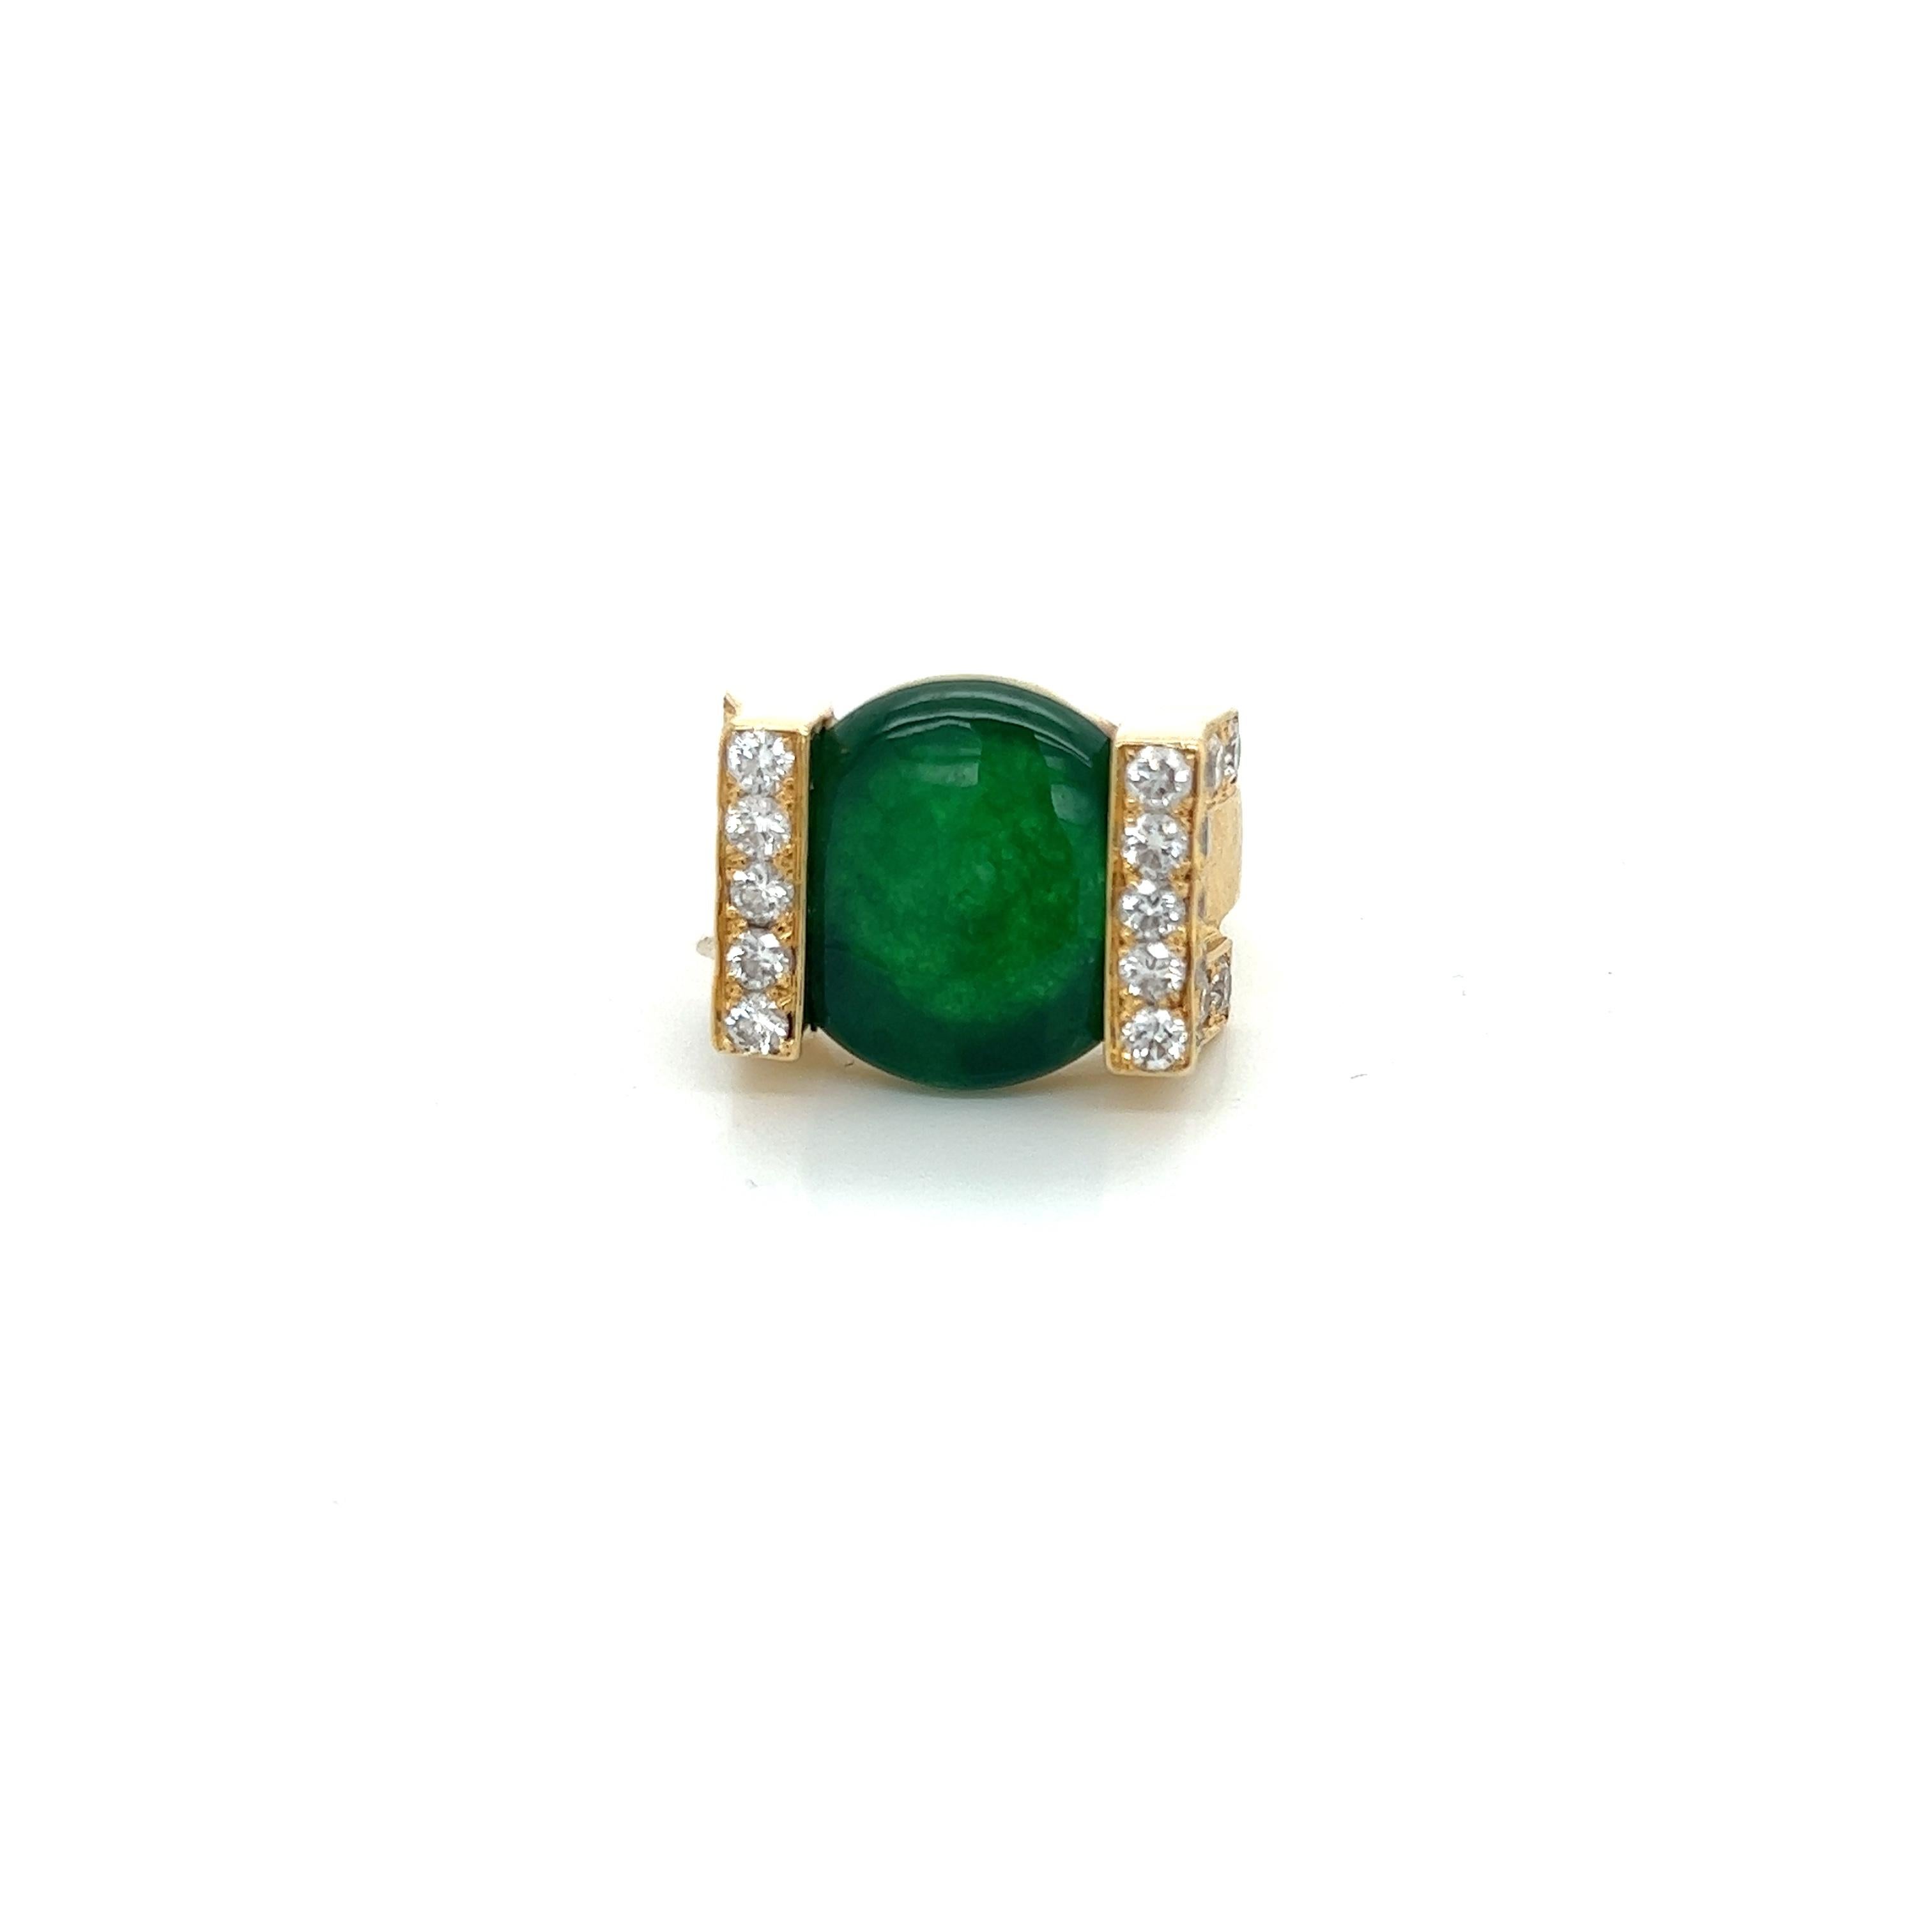 18k yellow gold cocktail ring with rich green jade and approximately 1.4tct white diamonds.
Size 5.75.